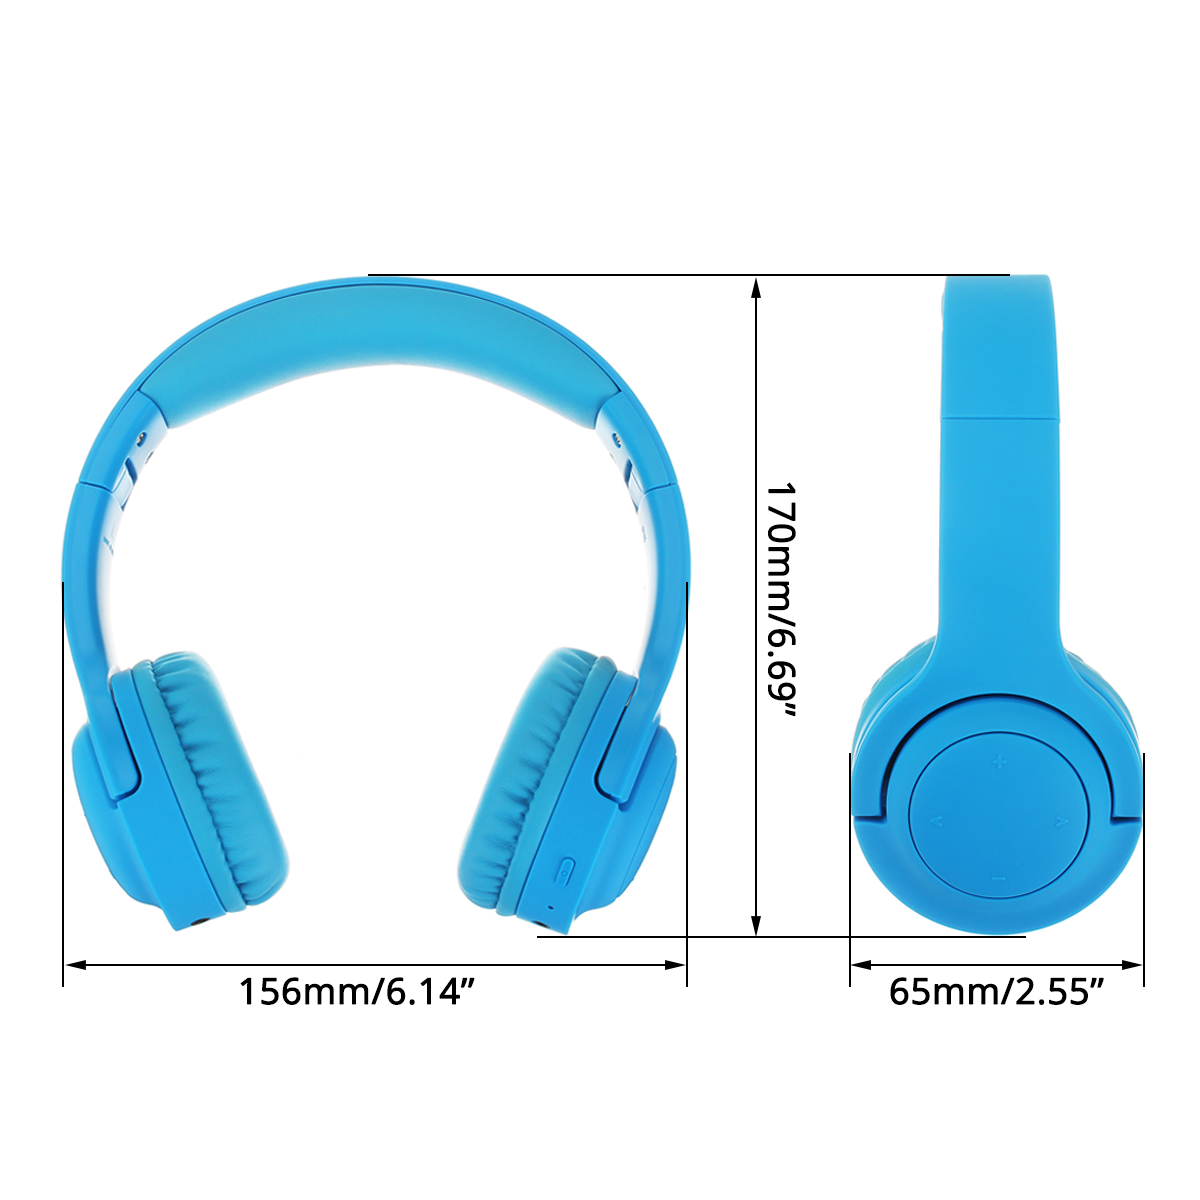 Picun-E3-Portable-Foldable-Kids-Headphone-bluetooth-Wireless-Headset-Built-in-Mic-with-Type-C-Chargi-1615886-8